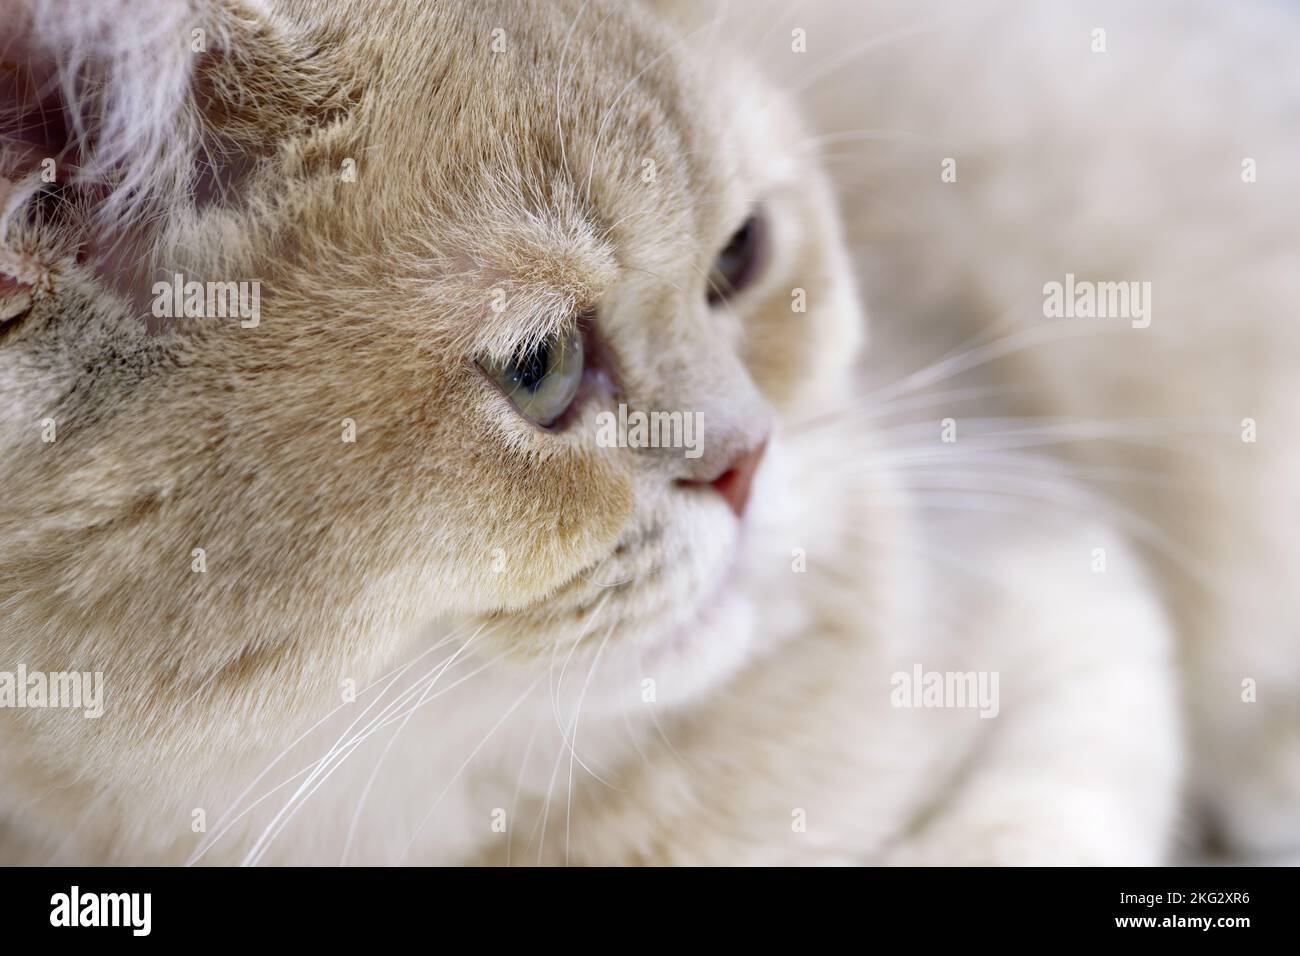 Young british shorthair cat, white and grey fur, close-up portrait Stock Photo